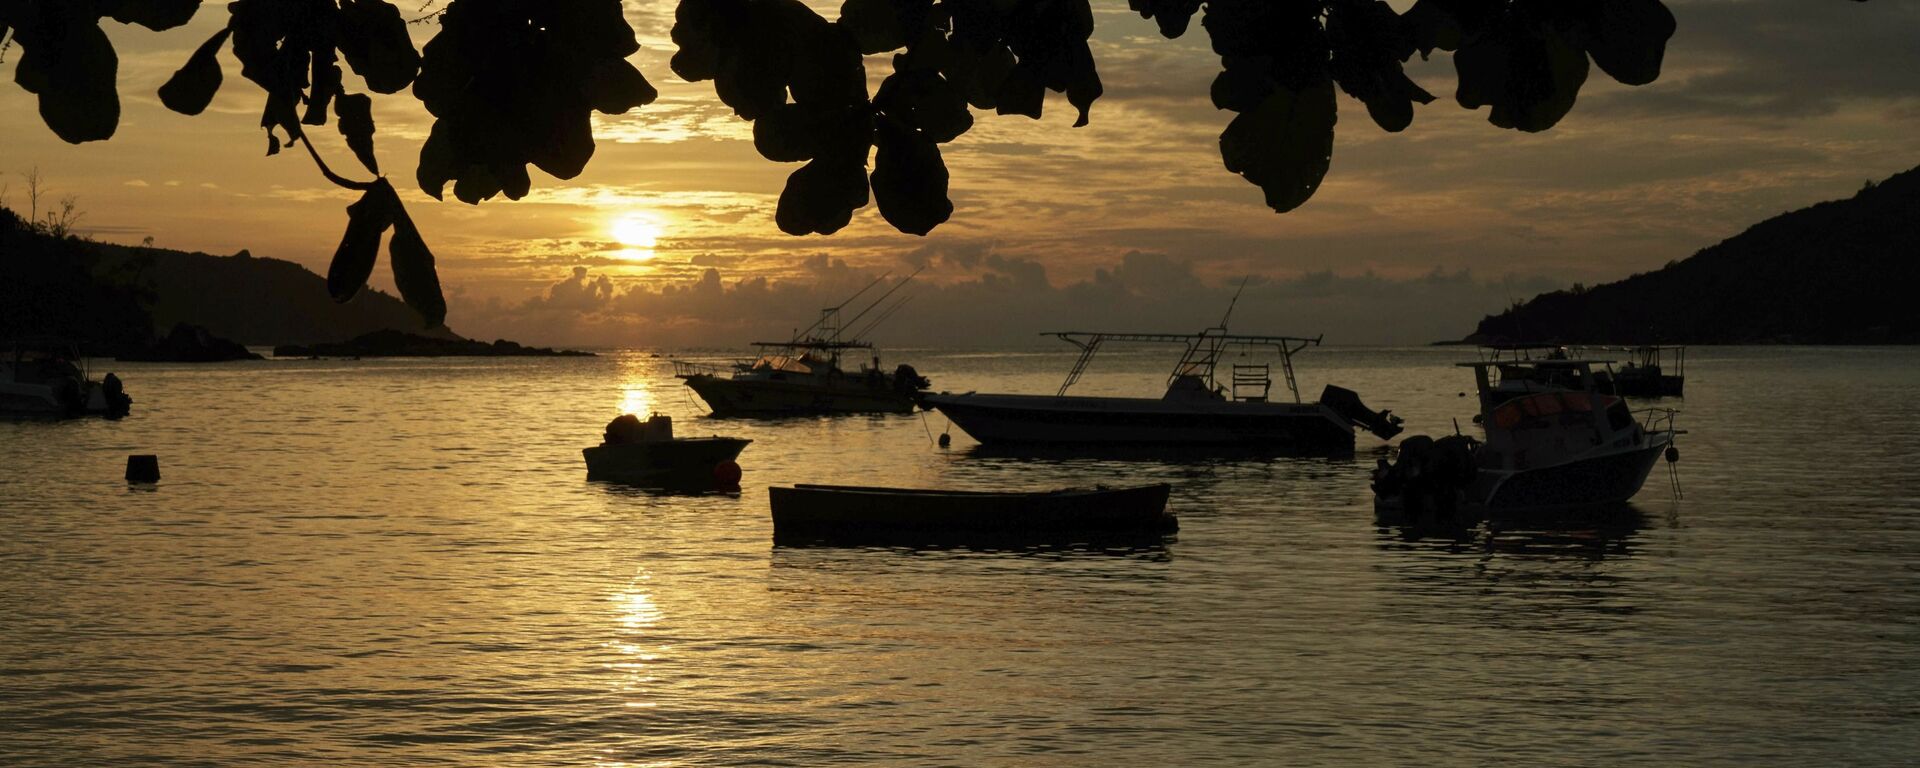 FILE - In this Friday, March 1, 2019 file photo, the sun sets over a small bay with fishing and pleasure crafts at anchor, on Mahe island, Seychelles.  - Sputnik International, 1920